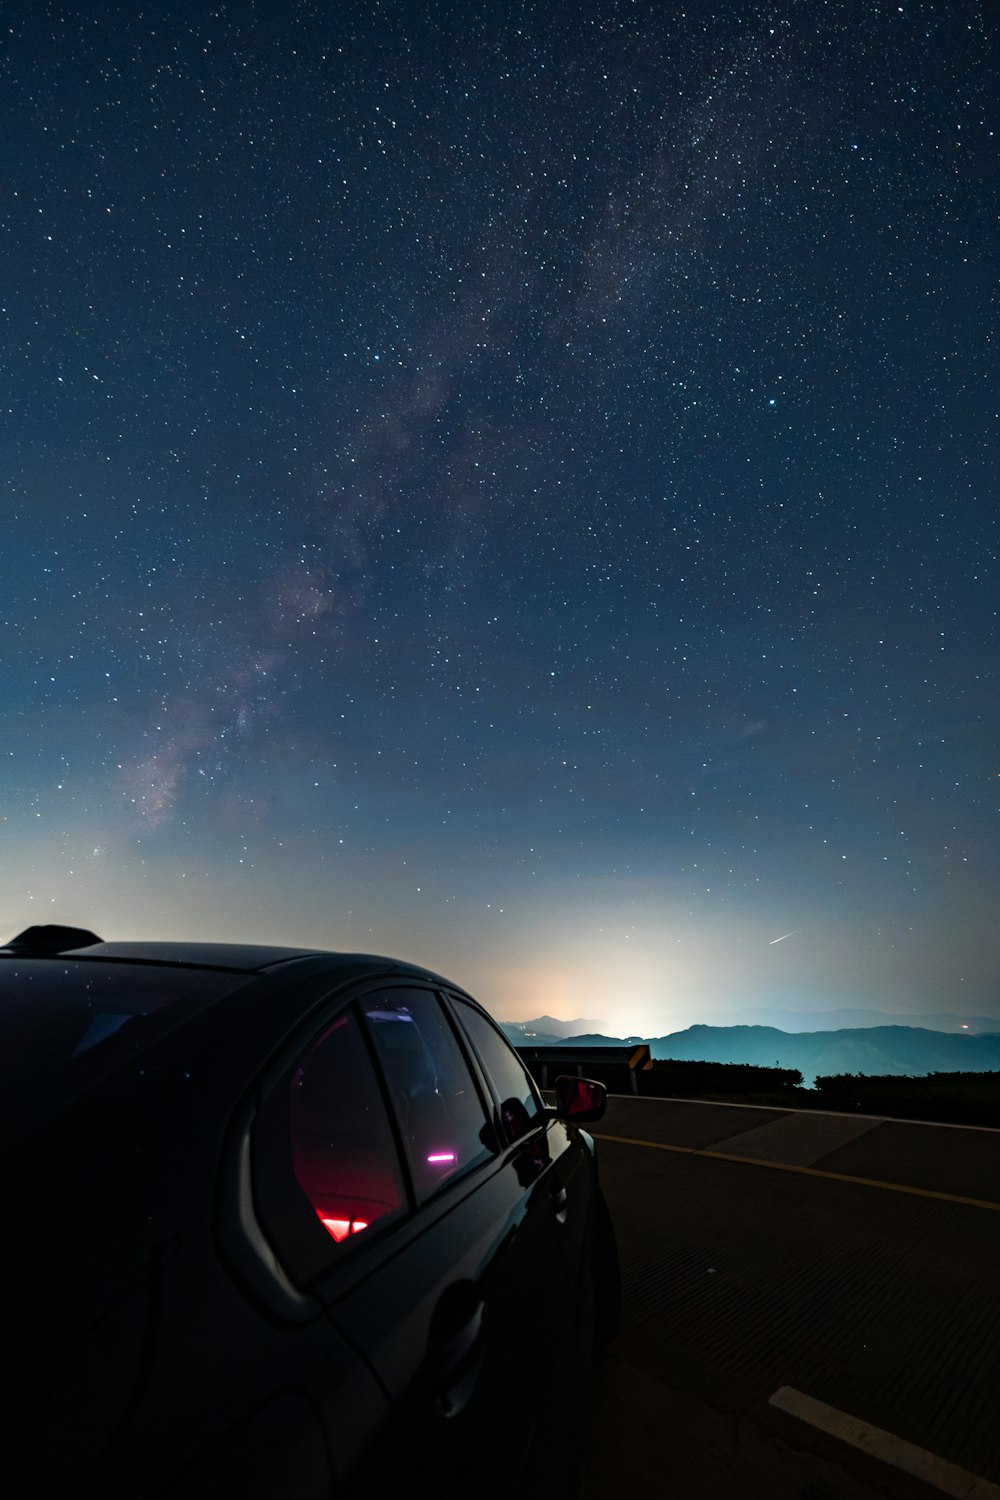 a car parked on the side of a road under a night sky filled with stars